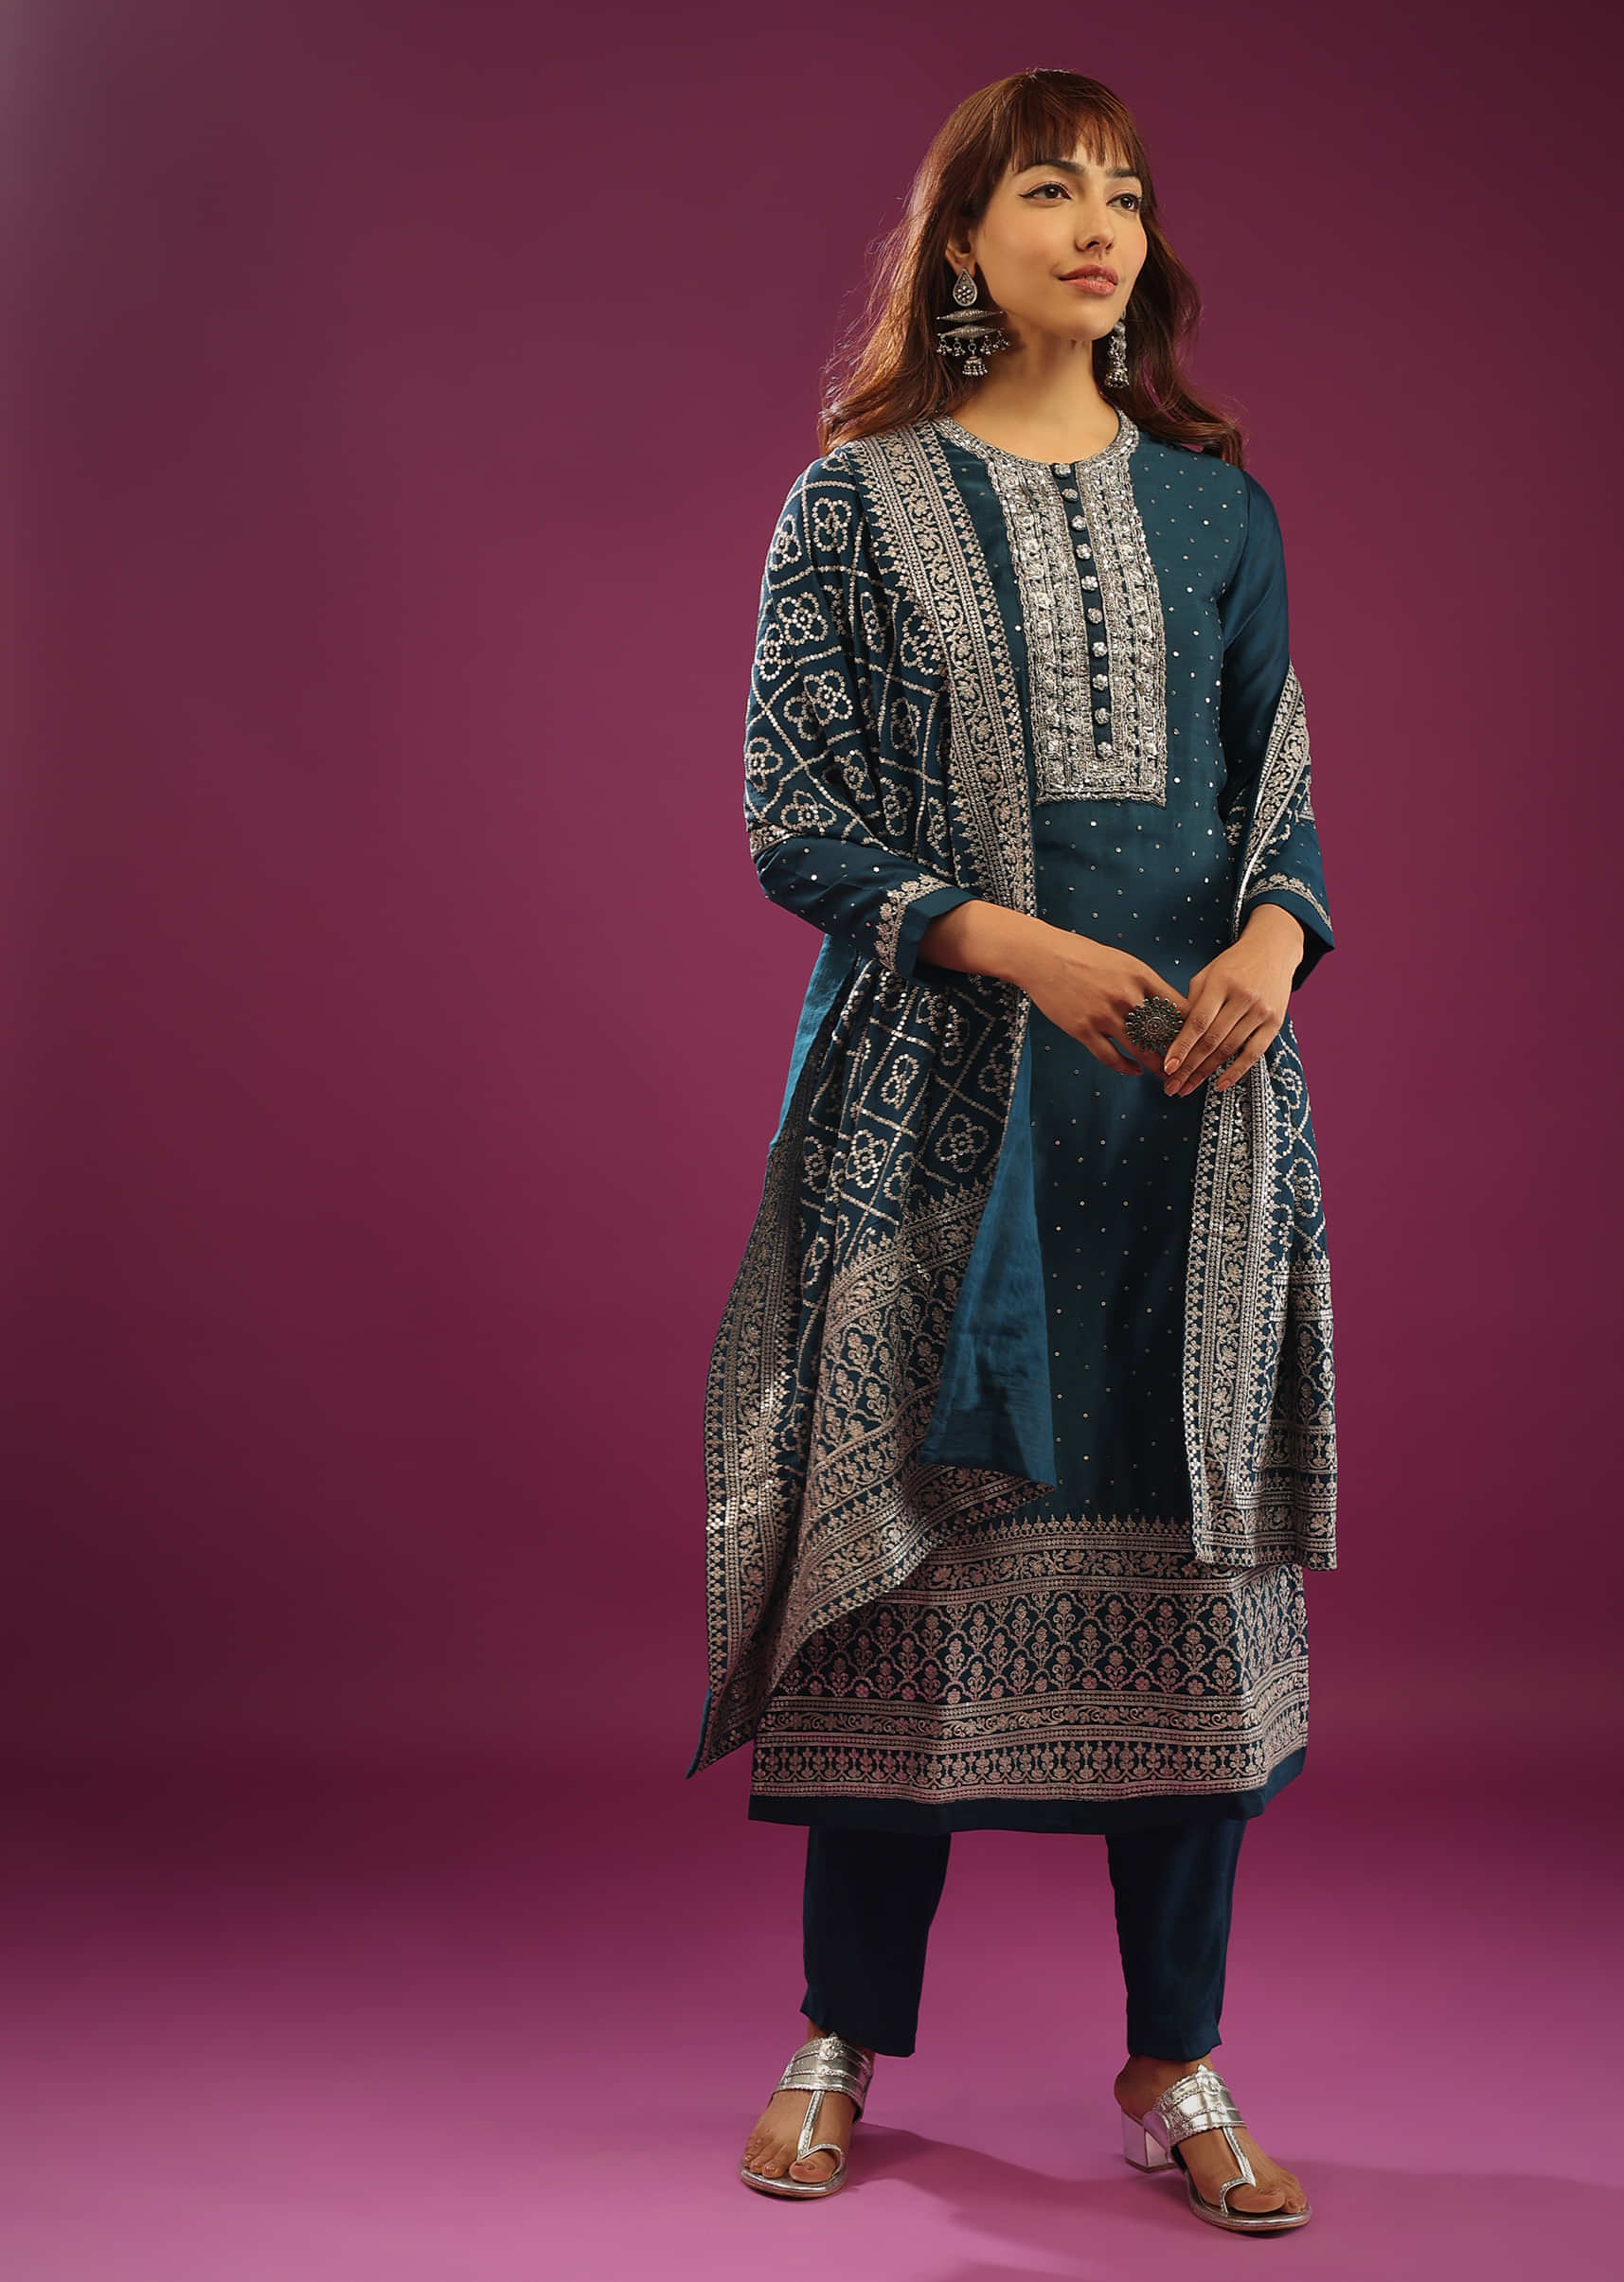 Persian Blue Pant Suit In Chanderi With Zardosi And Zari Embroidery